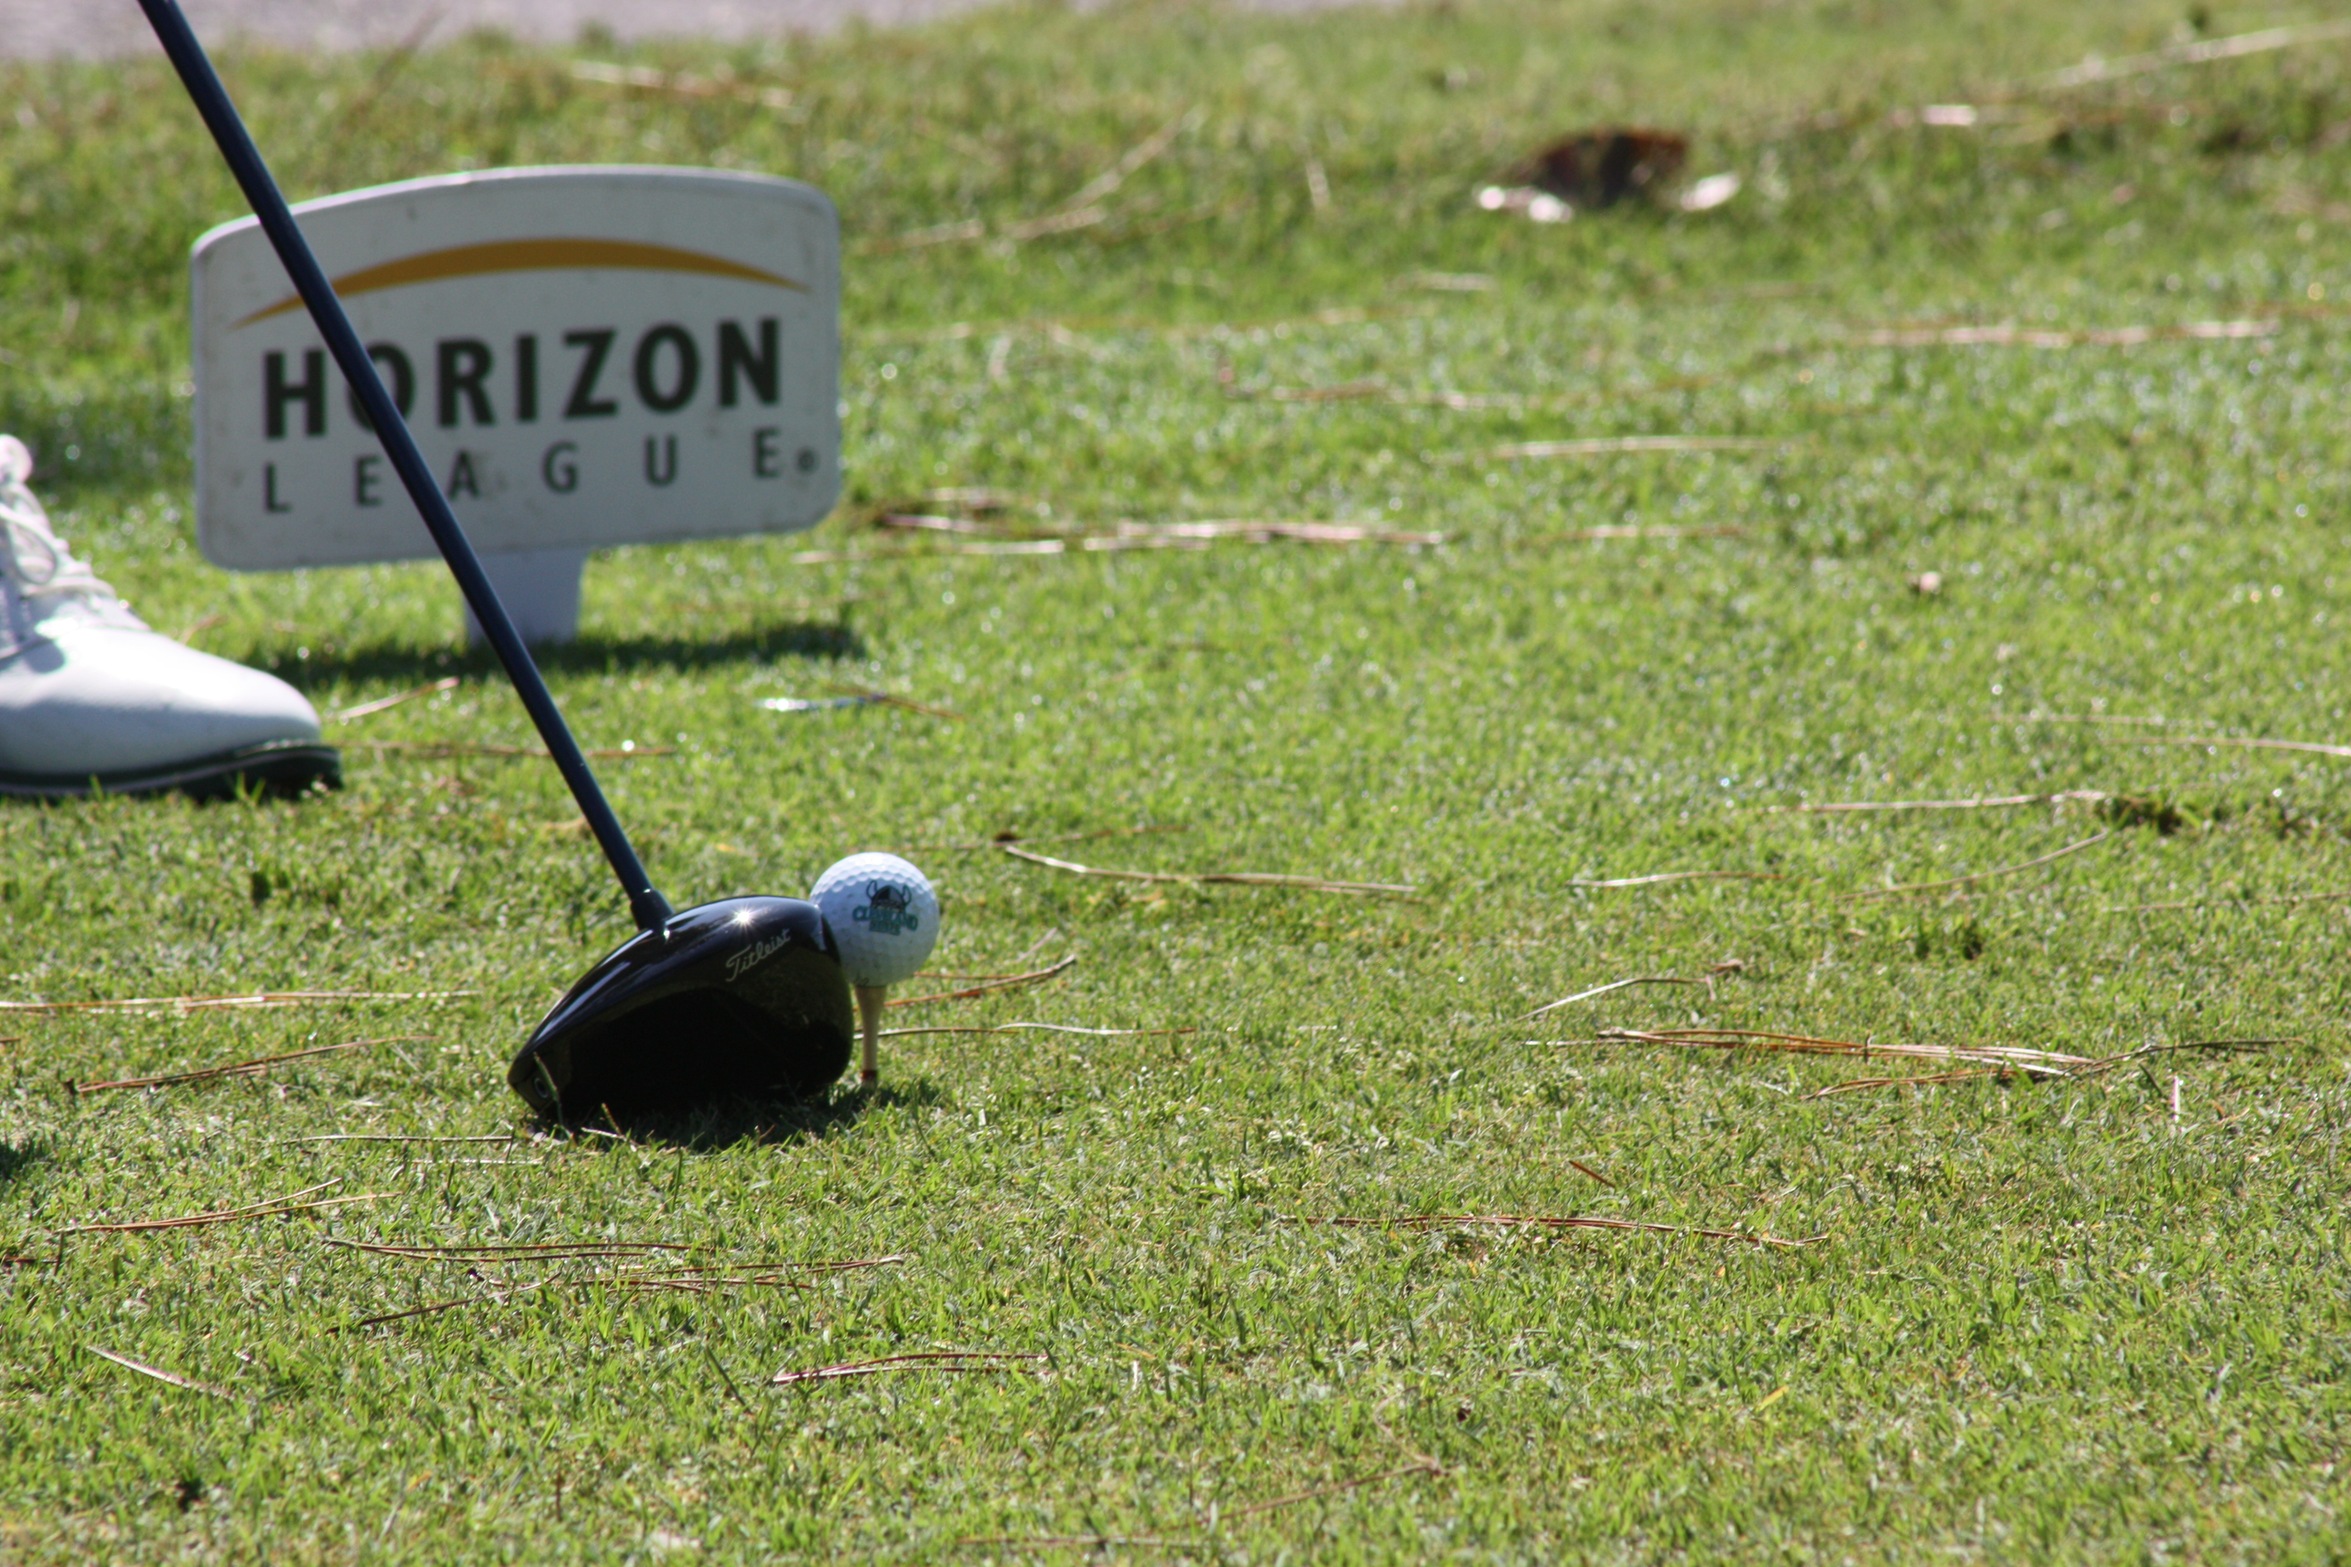 Cleveland State Golf Teams Set to Tee it Up at Horizon League Championship